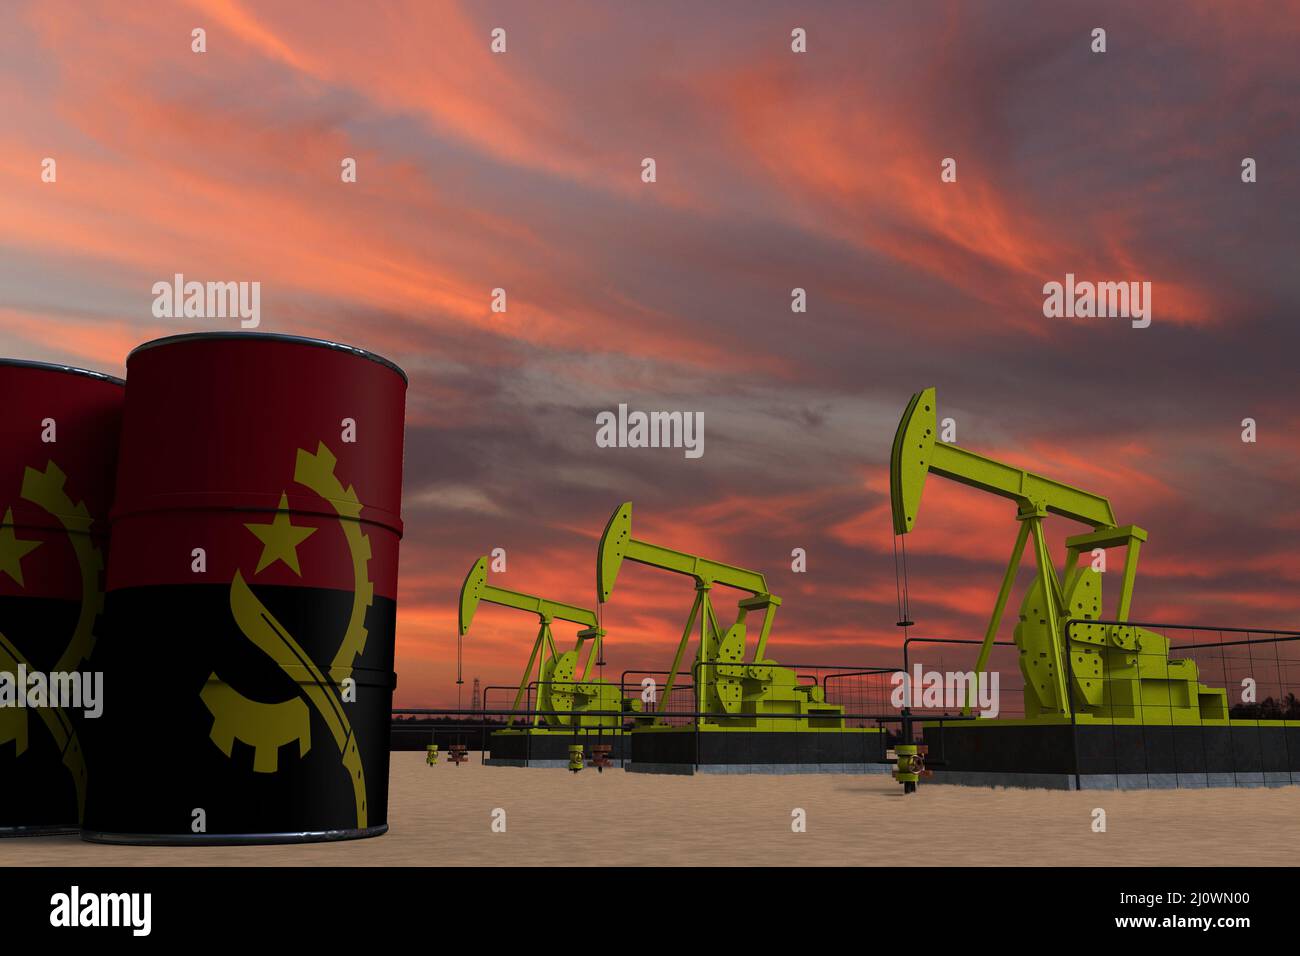 Nice pumpjack oil extraction and cloudy sky in sunset with the ANGOLA flag on oil barrels 3D rendering Stock Photo